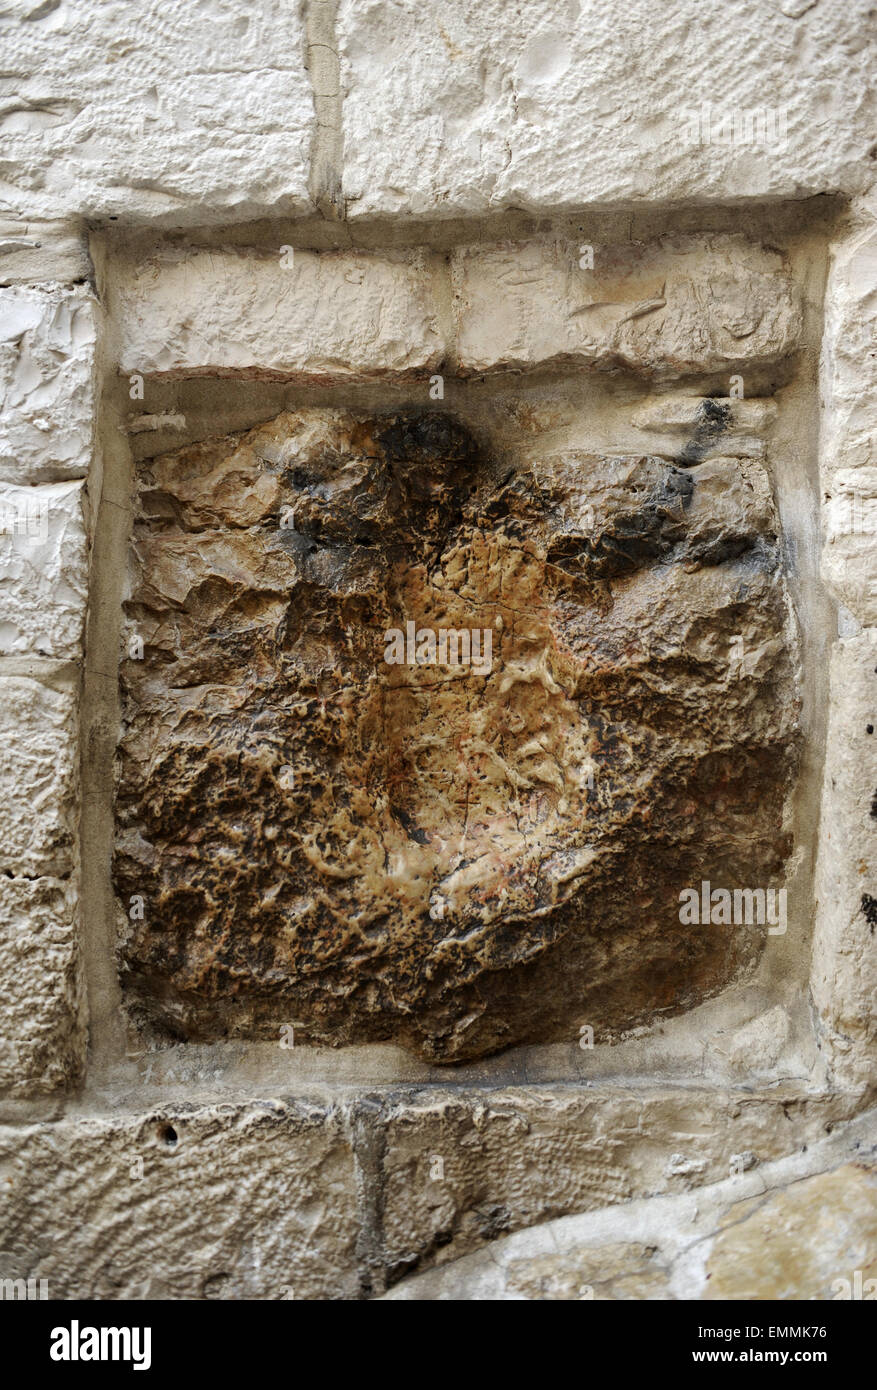 Israel. Jerusalem. Old City. Old City. V Station. Place of encounter between Jesus and Simon of Cyrene, the man who carried the cross of Christ to Mount Calvary. Detail of the stone from 1st century, where it's said that Jesus left the print of his hand. Stock Photo